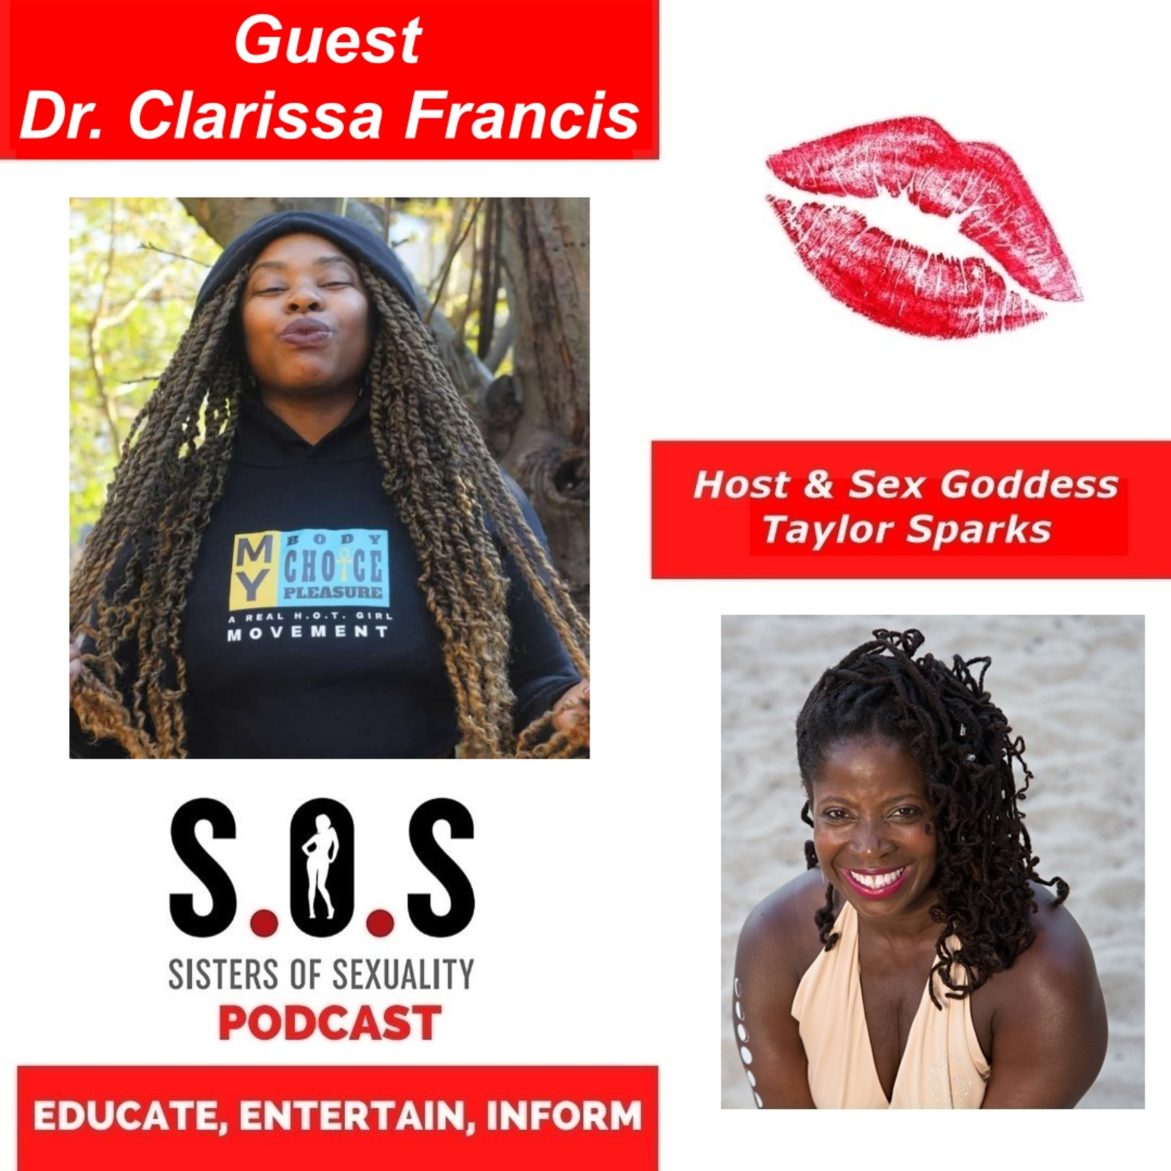 Black Podcasting - A Vibrant Conversation With The Real Hot Girl Doc - Dr. Clarissa Francis